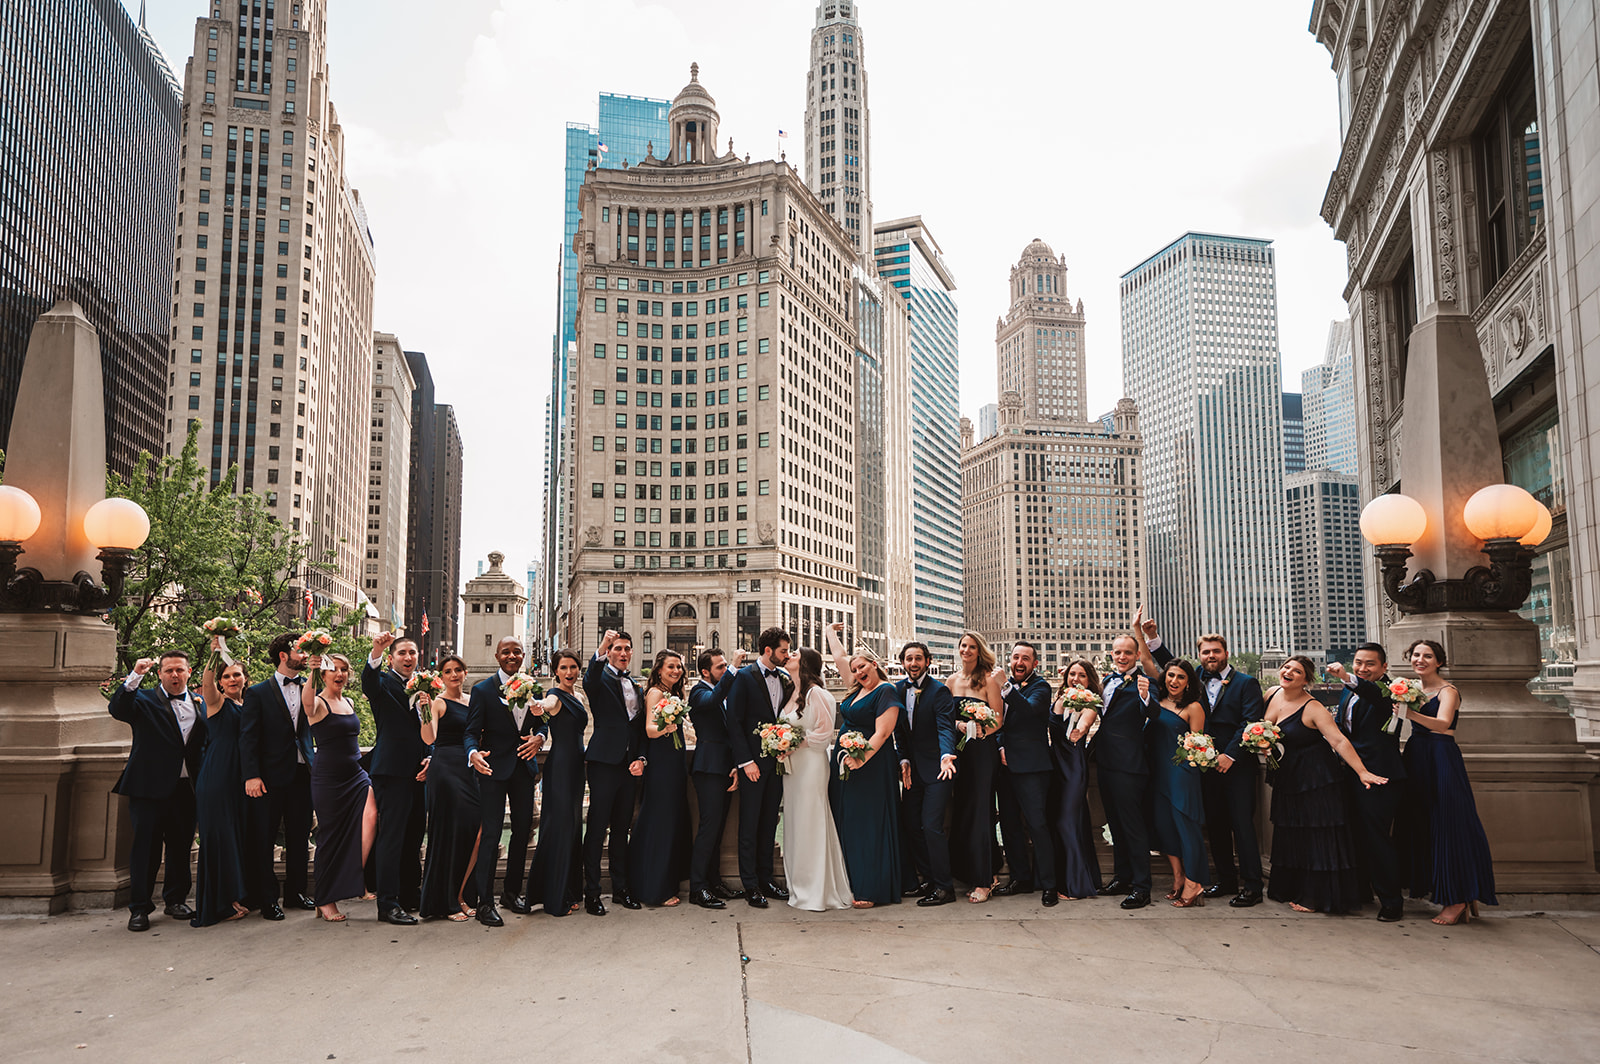 Wedding party at the Wrigley building in Chicago